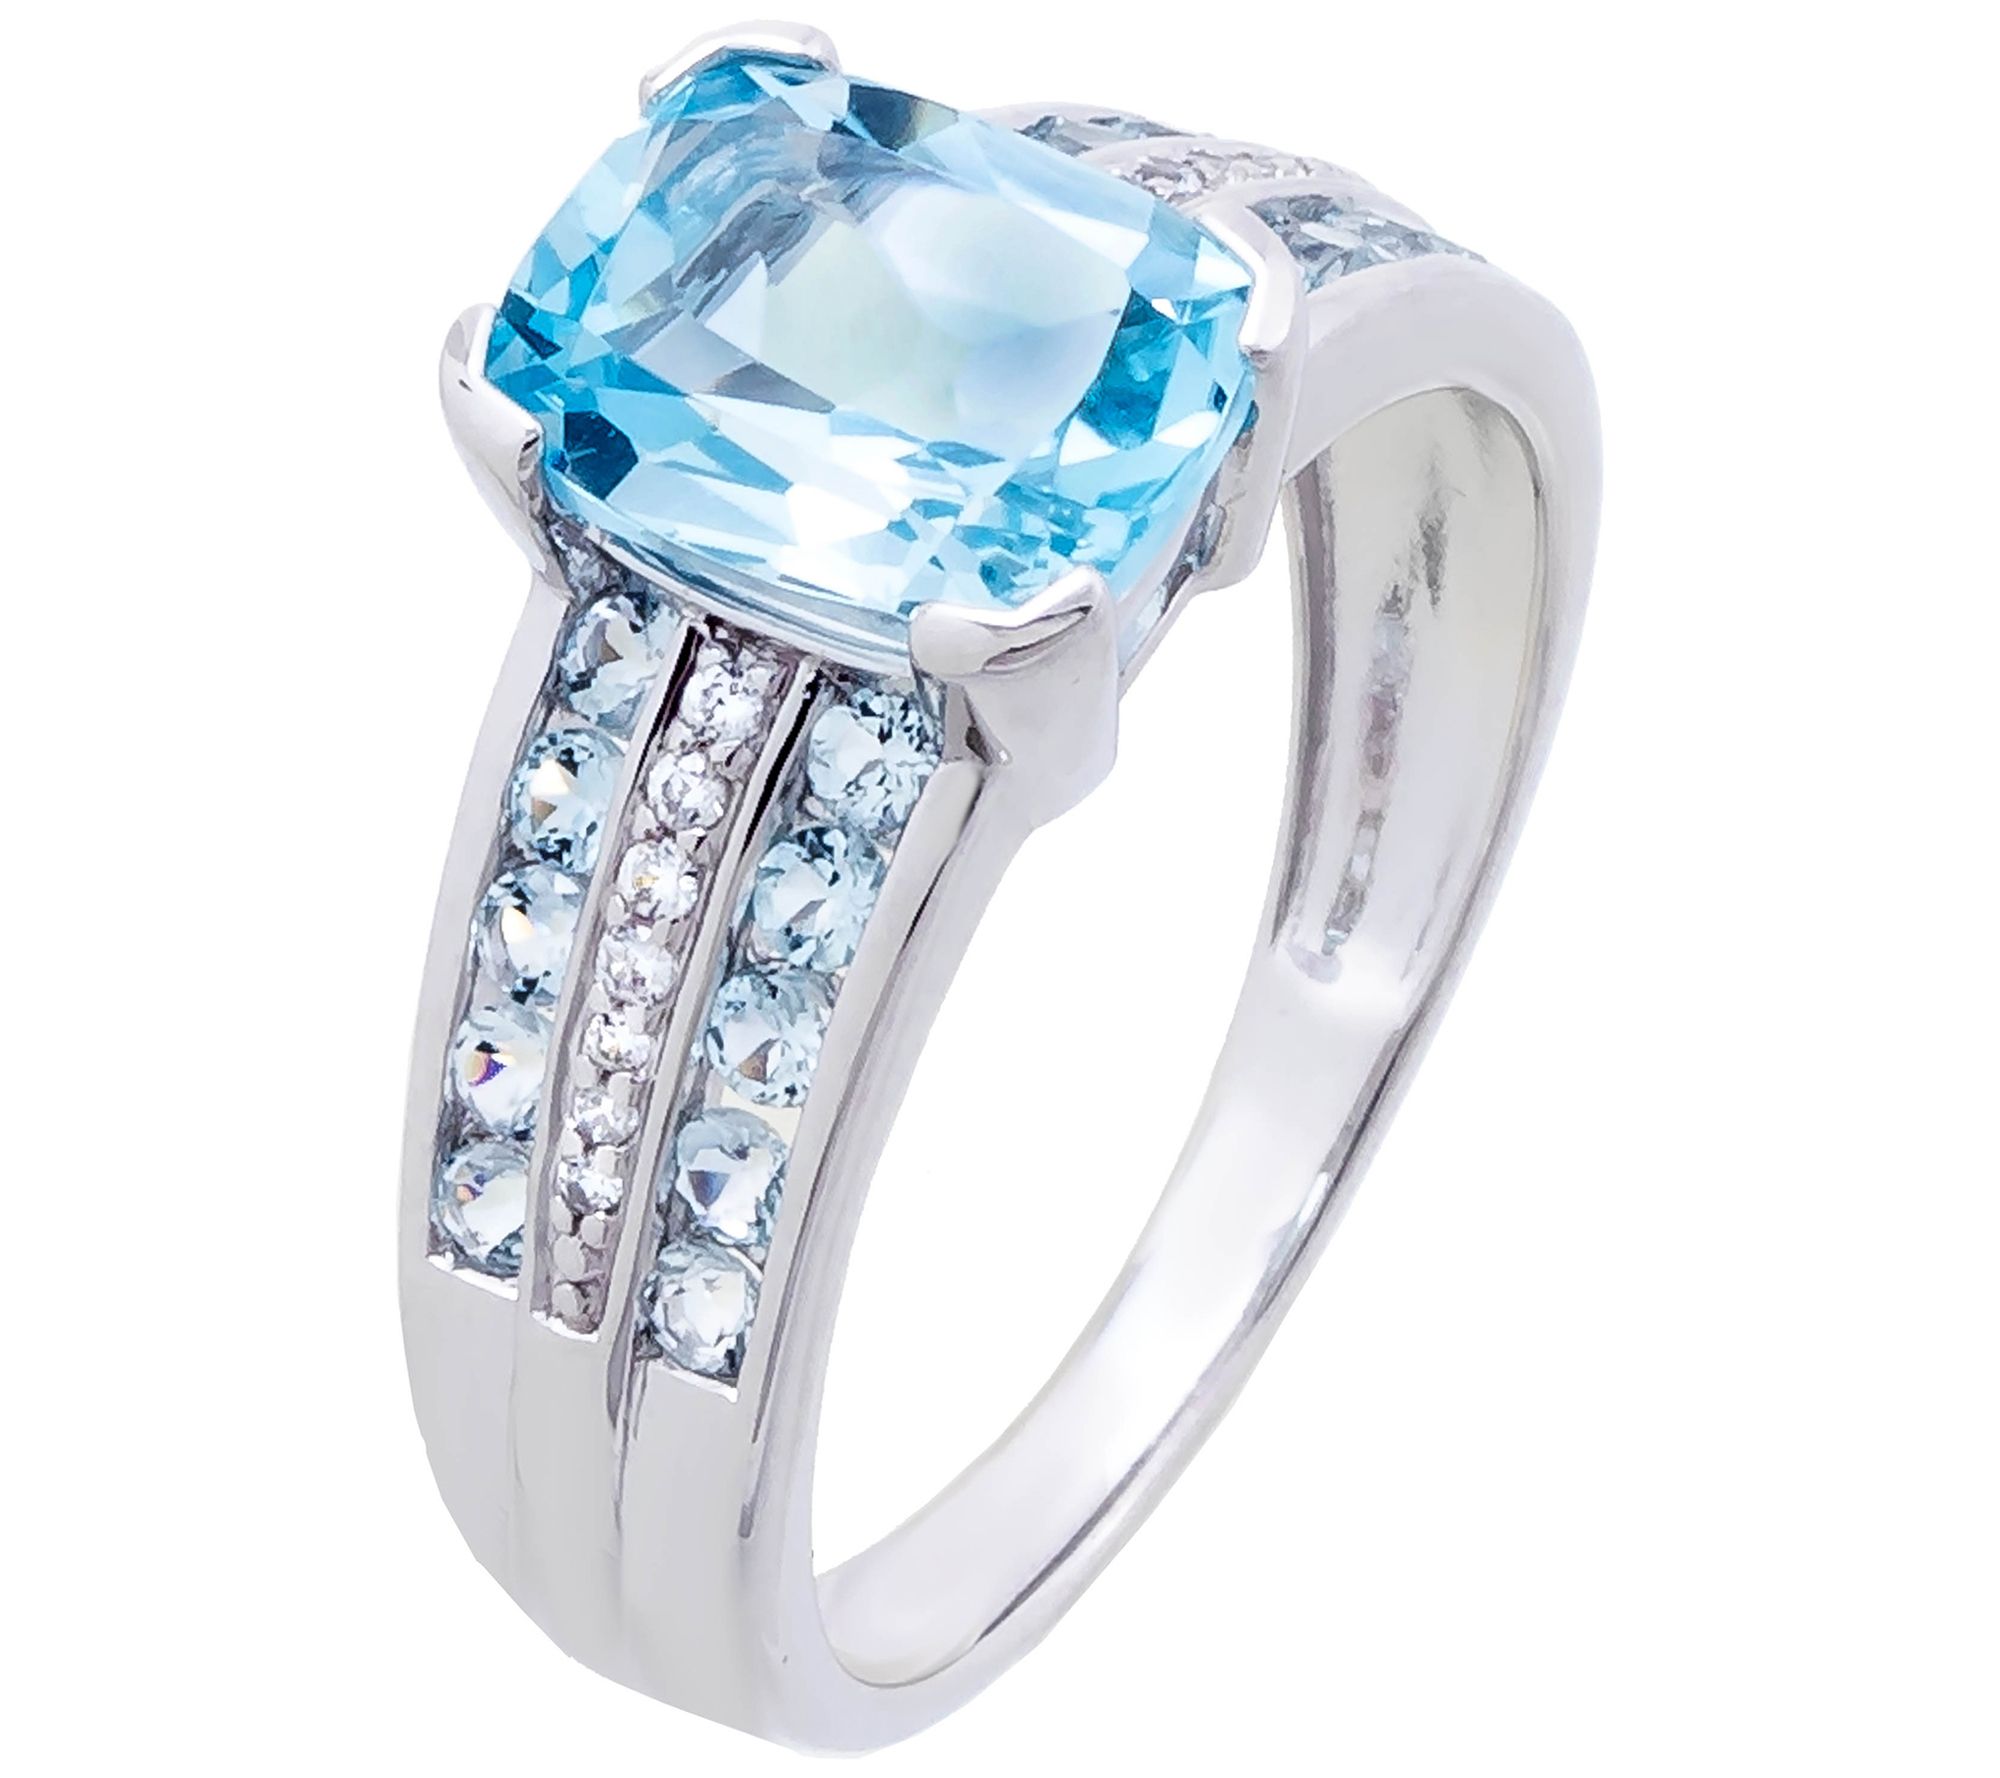 Sterling Silver Men’s Ring Swiss Blue Topaz Handcrafted Unique Persona